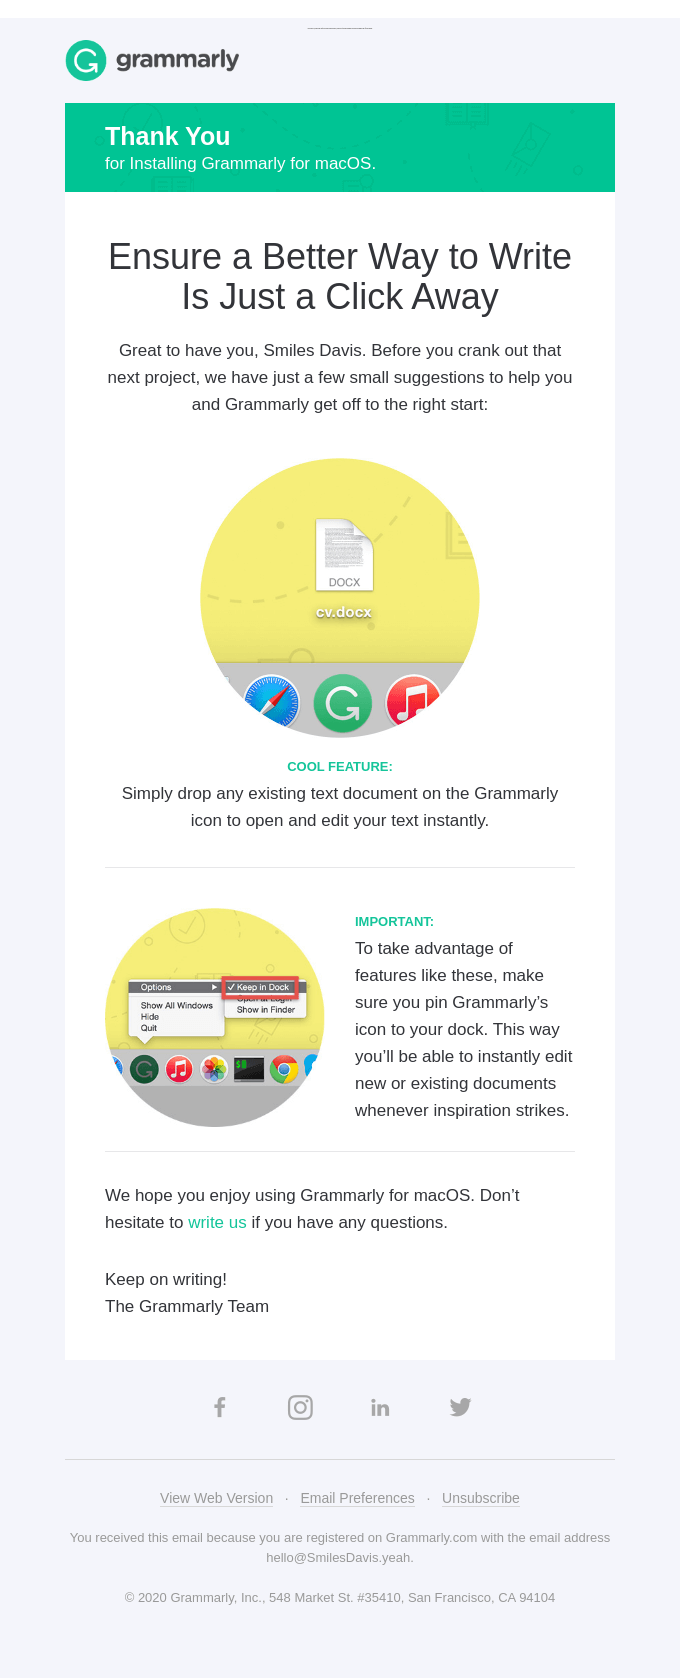 Thank you for installing Grammarly's Native App! - Grammarly Email Newsletter